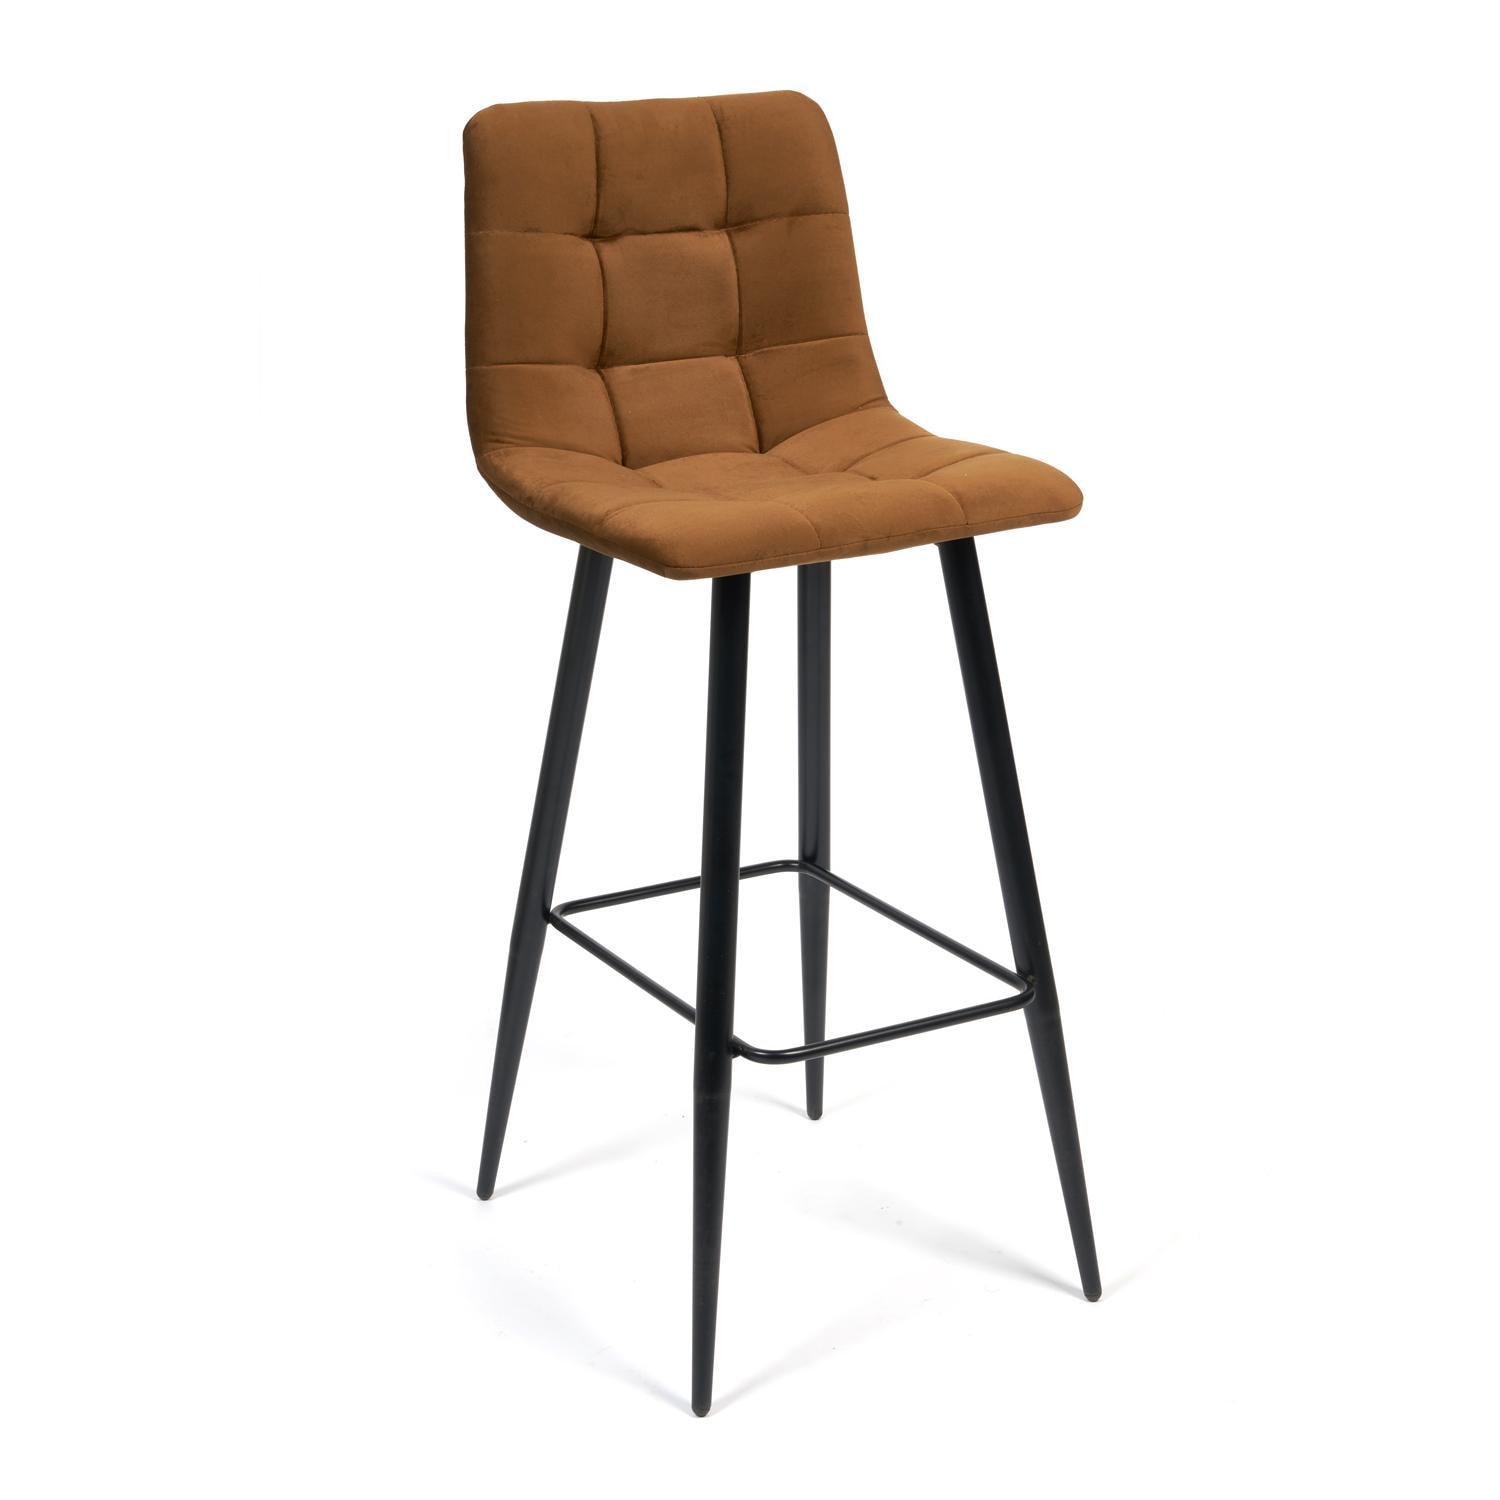 TetChair   TetChair Chilly 7095 brown barkhat